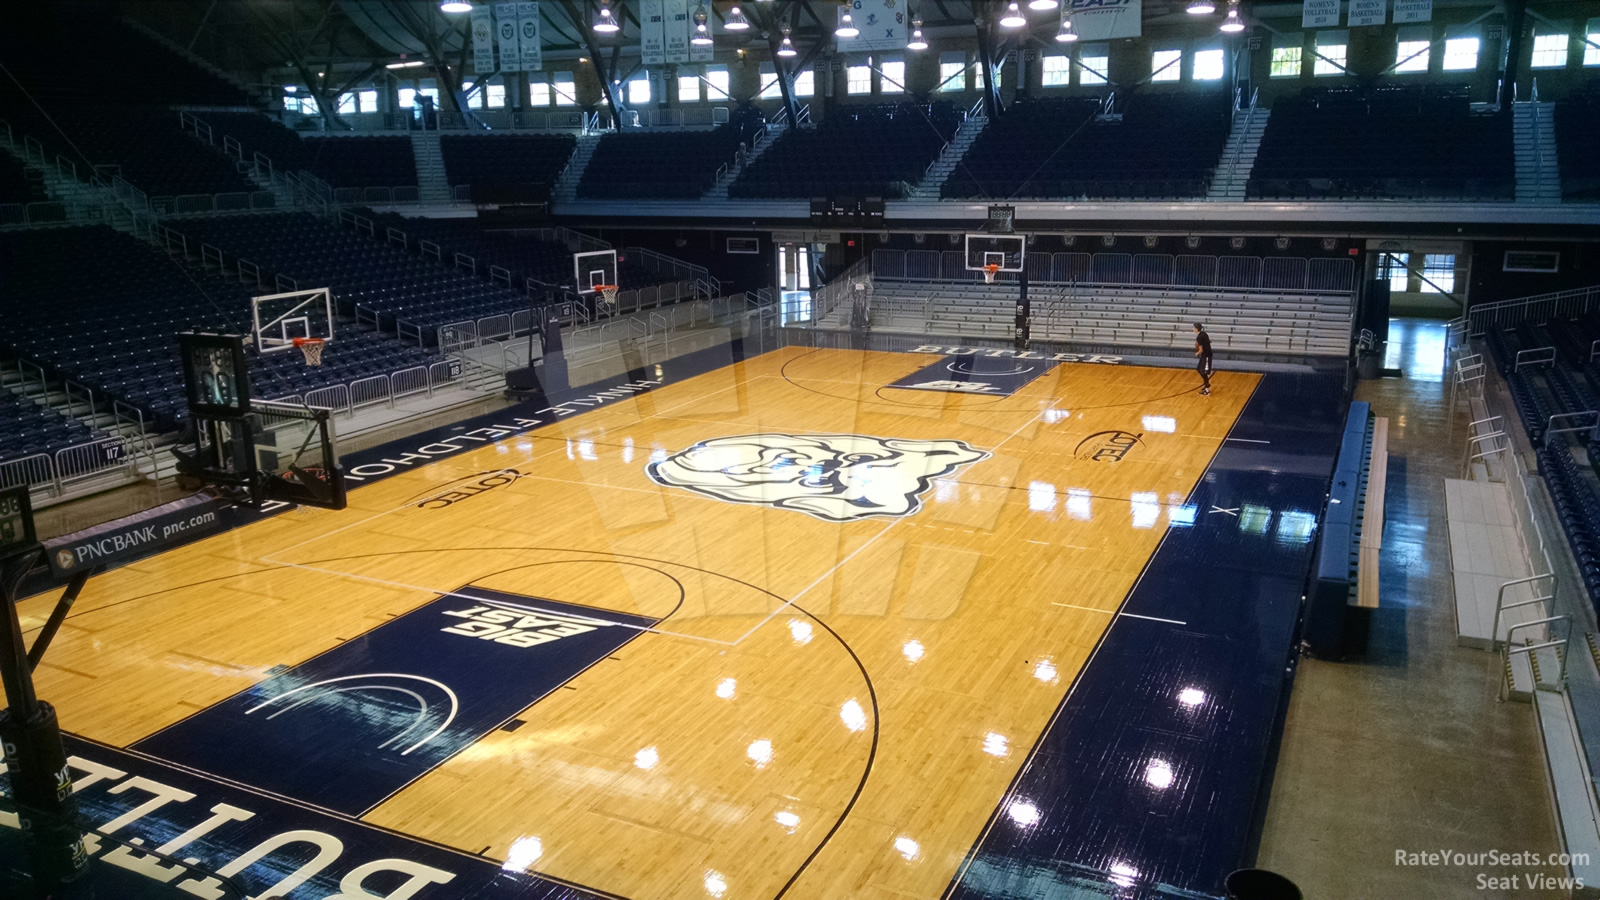 section 211, row 2 seat view  - hinkle fieldhouse